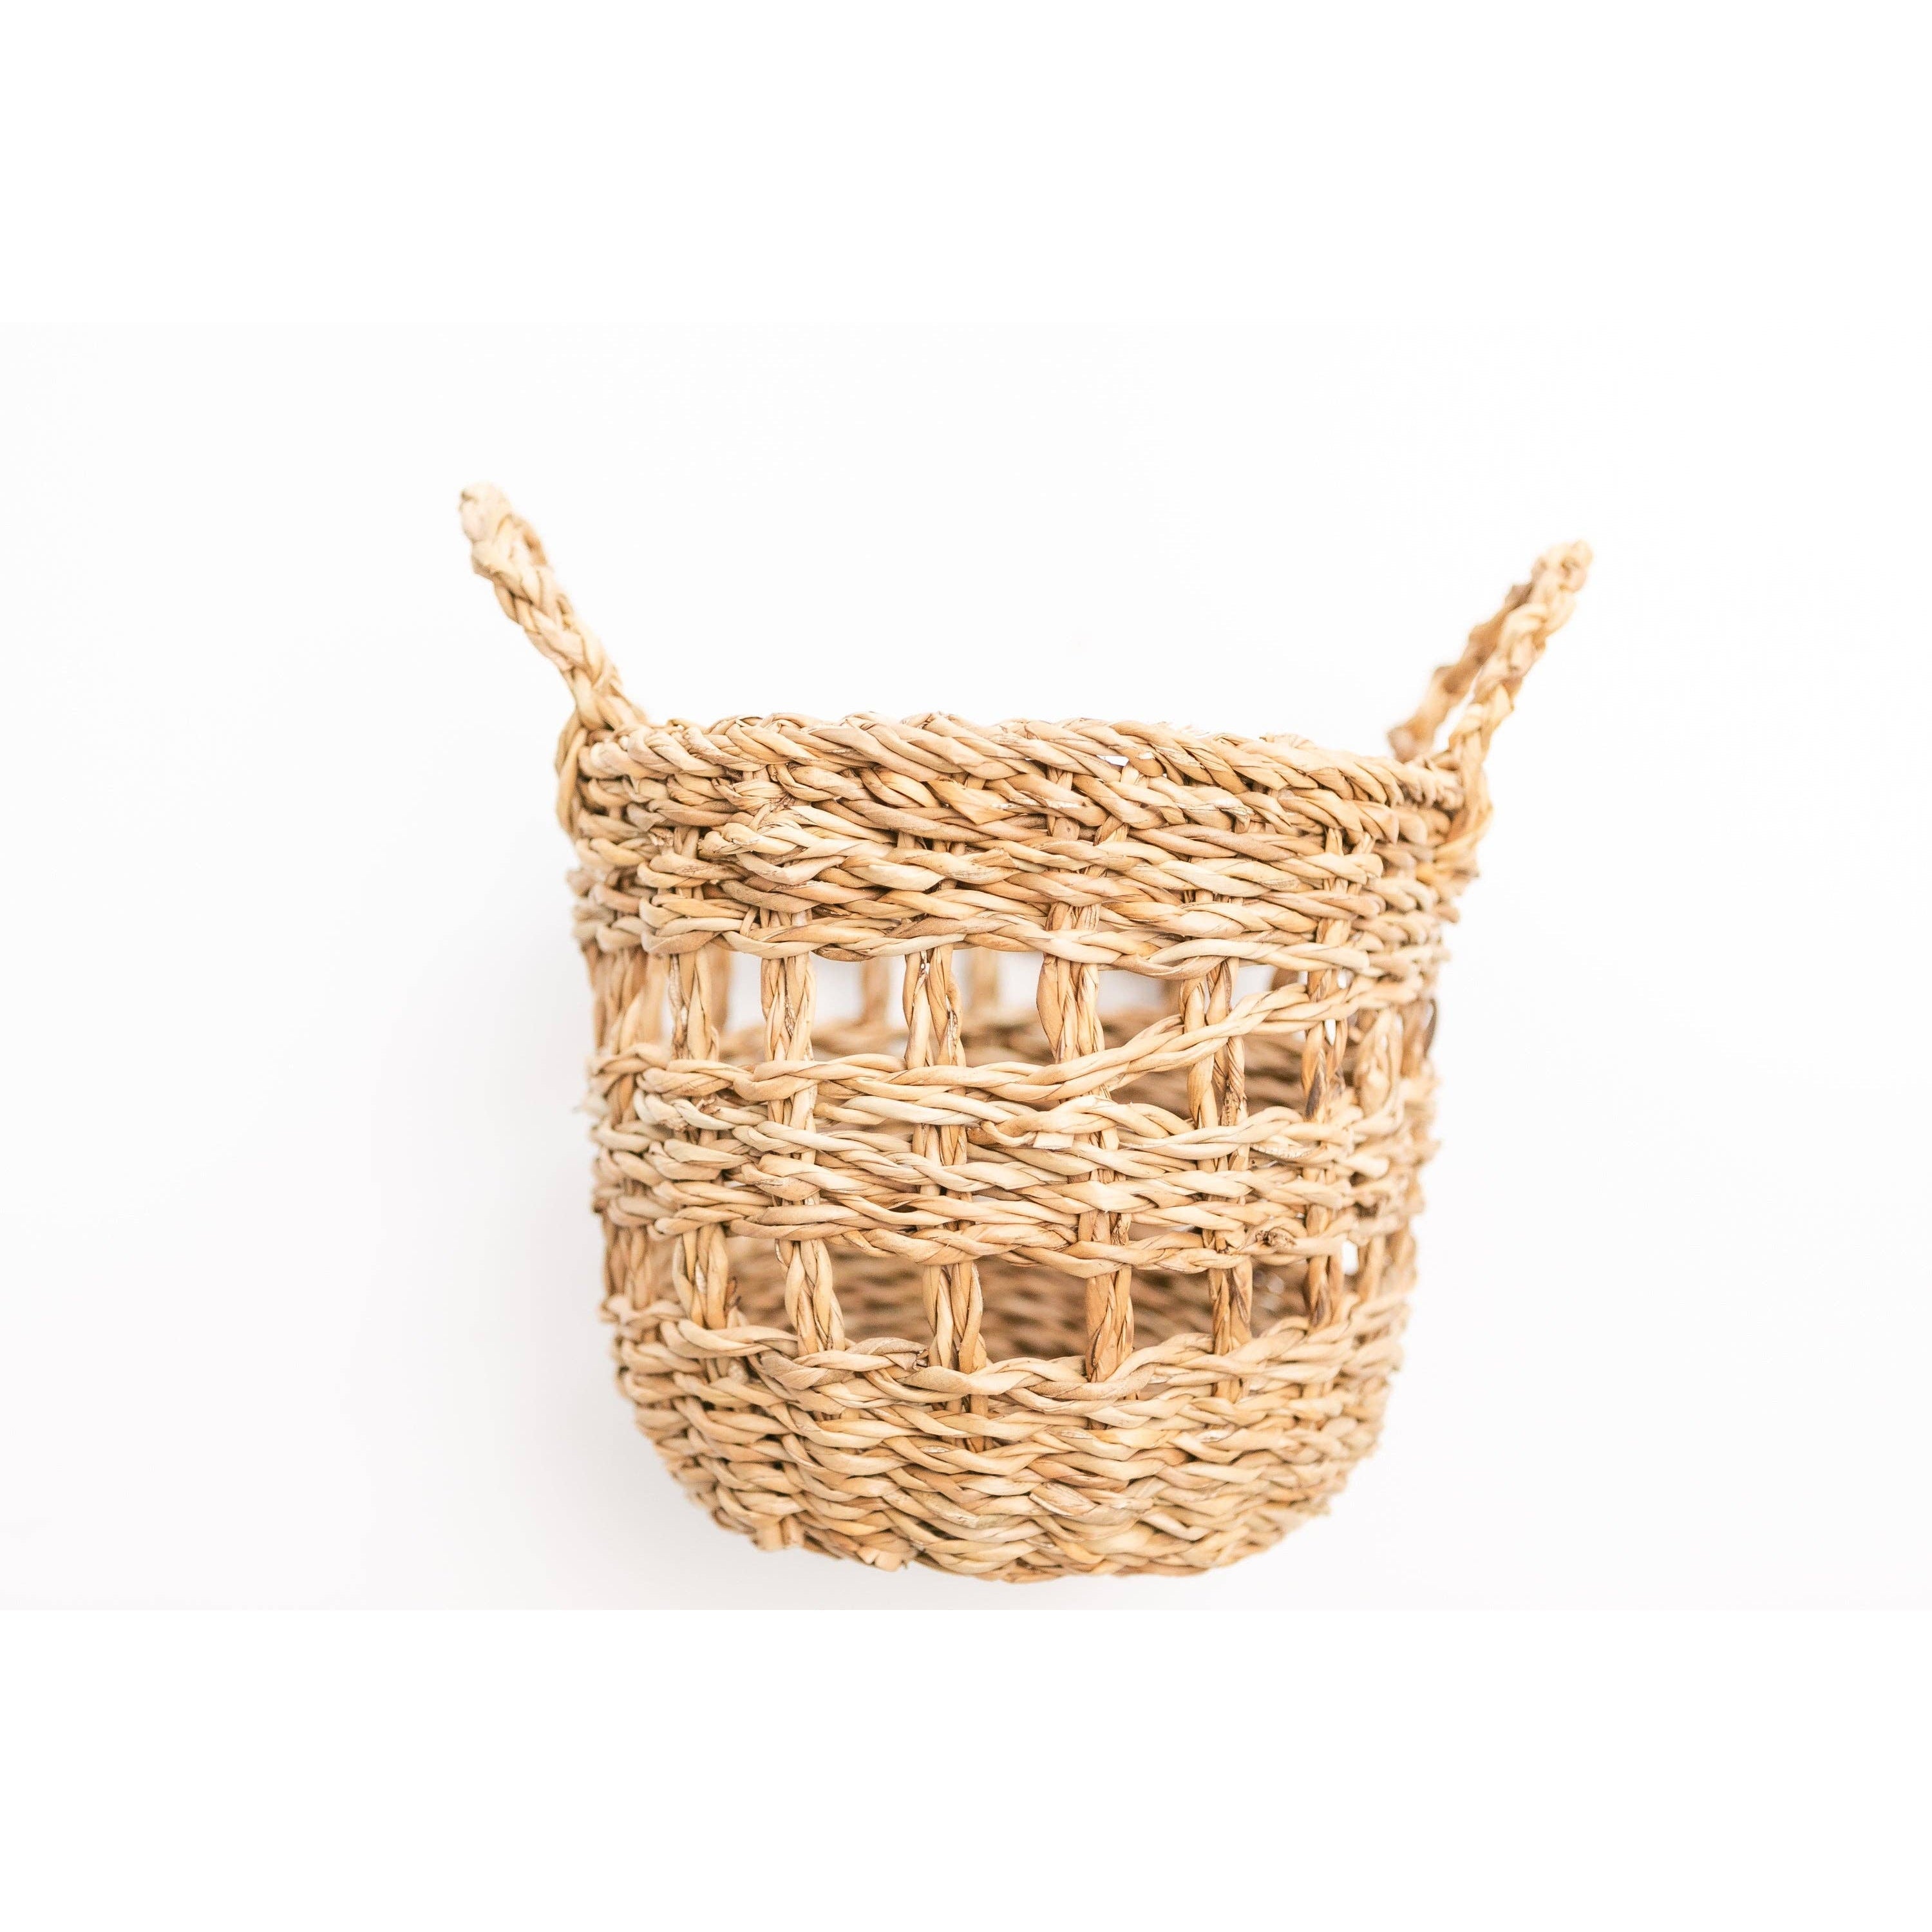 Hogla Cutout Basket-Large - Sold Individually (*Local Pickup/Local Delivery Only)